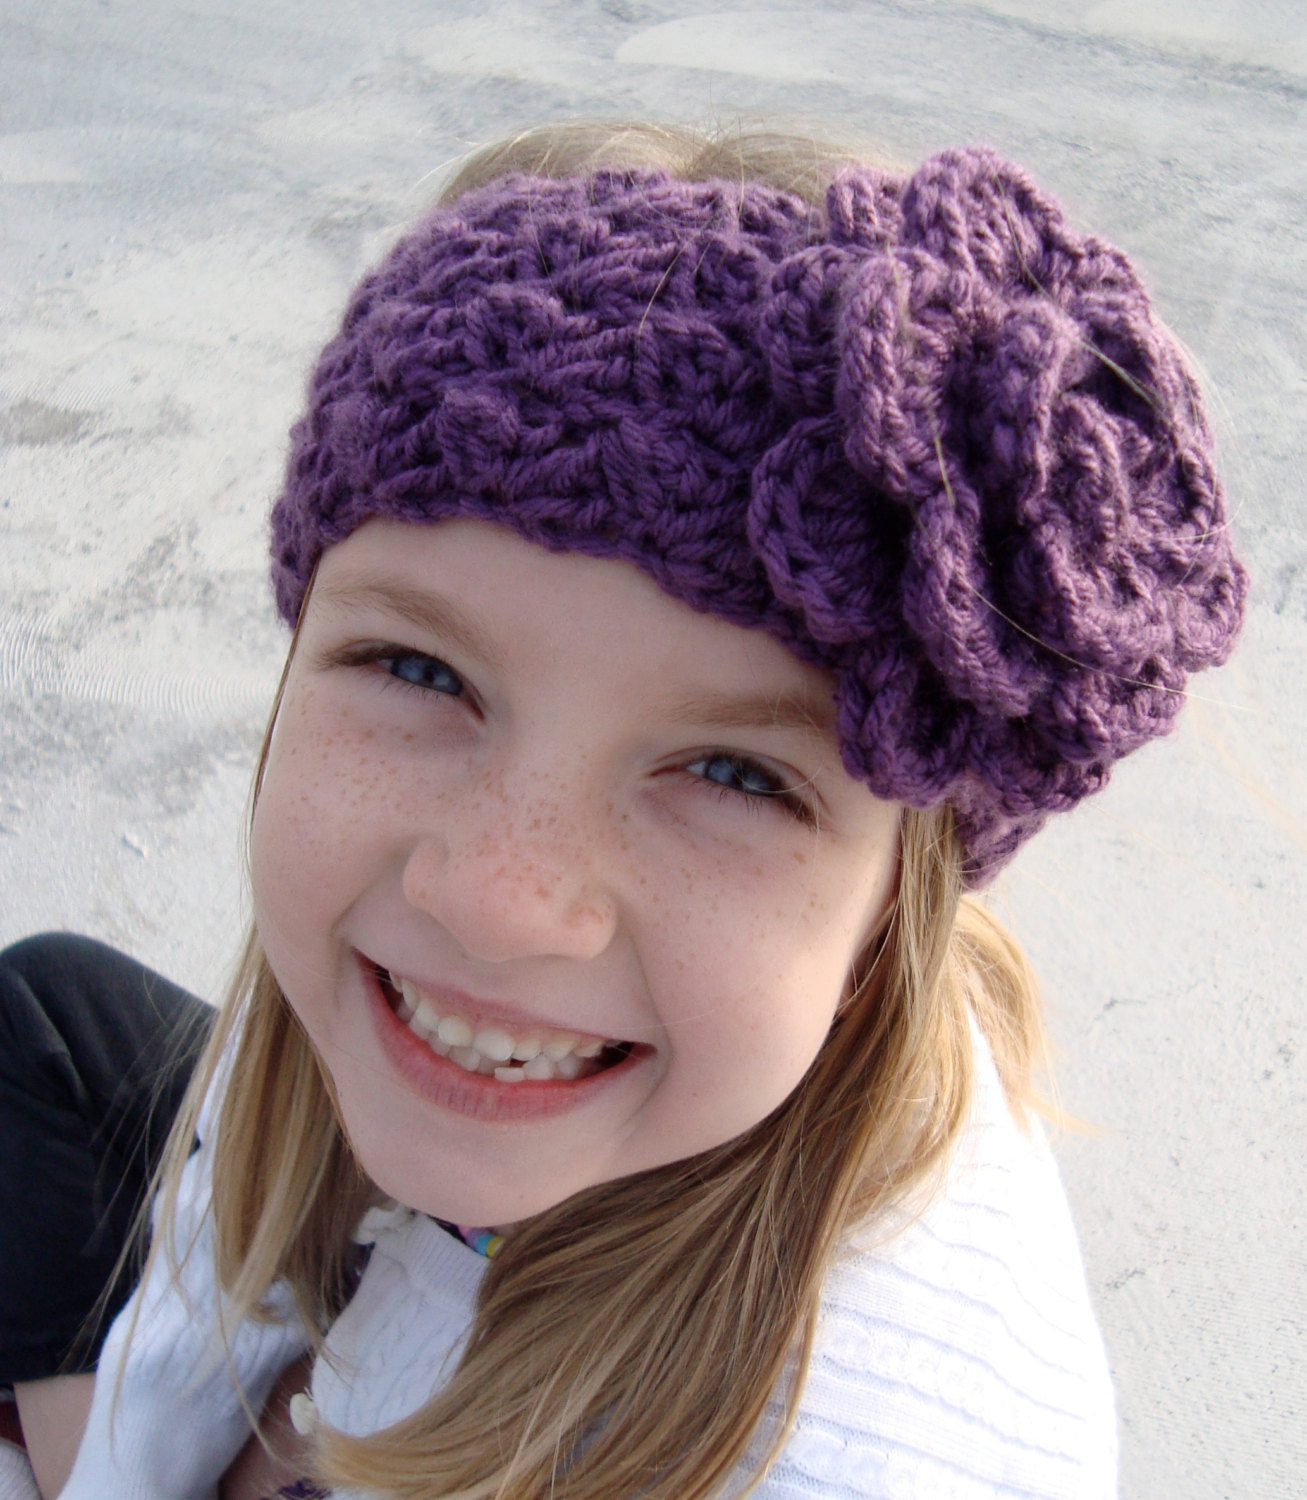 Knitted Headband With Flower Pattern Girls Crochet Headbands For All Crochet And Knitting Patterns 2019